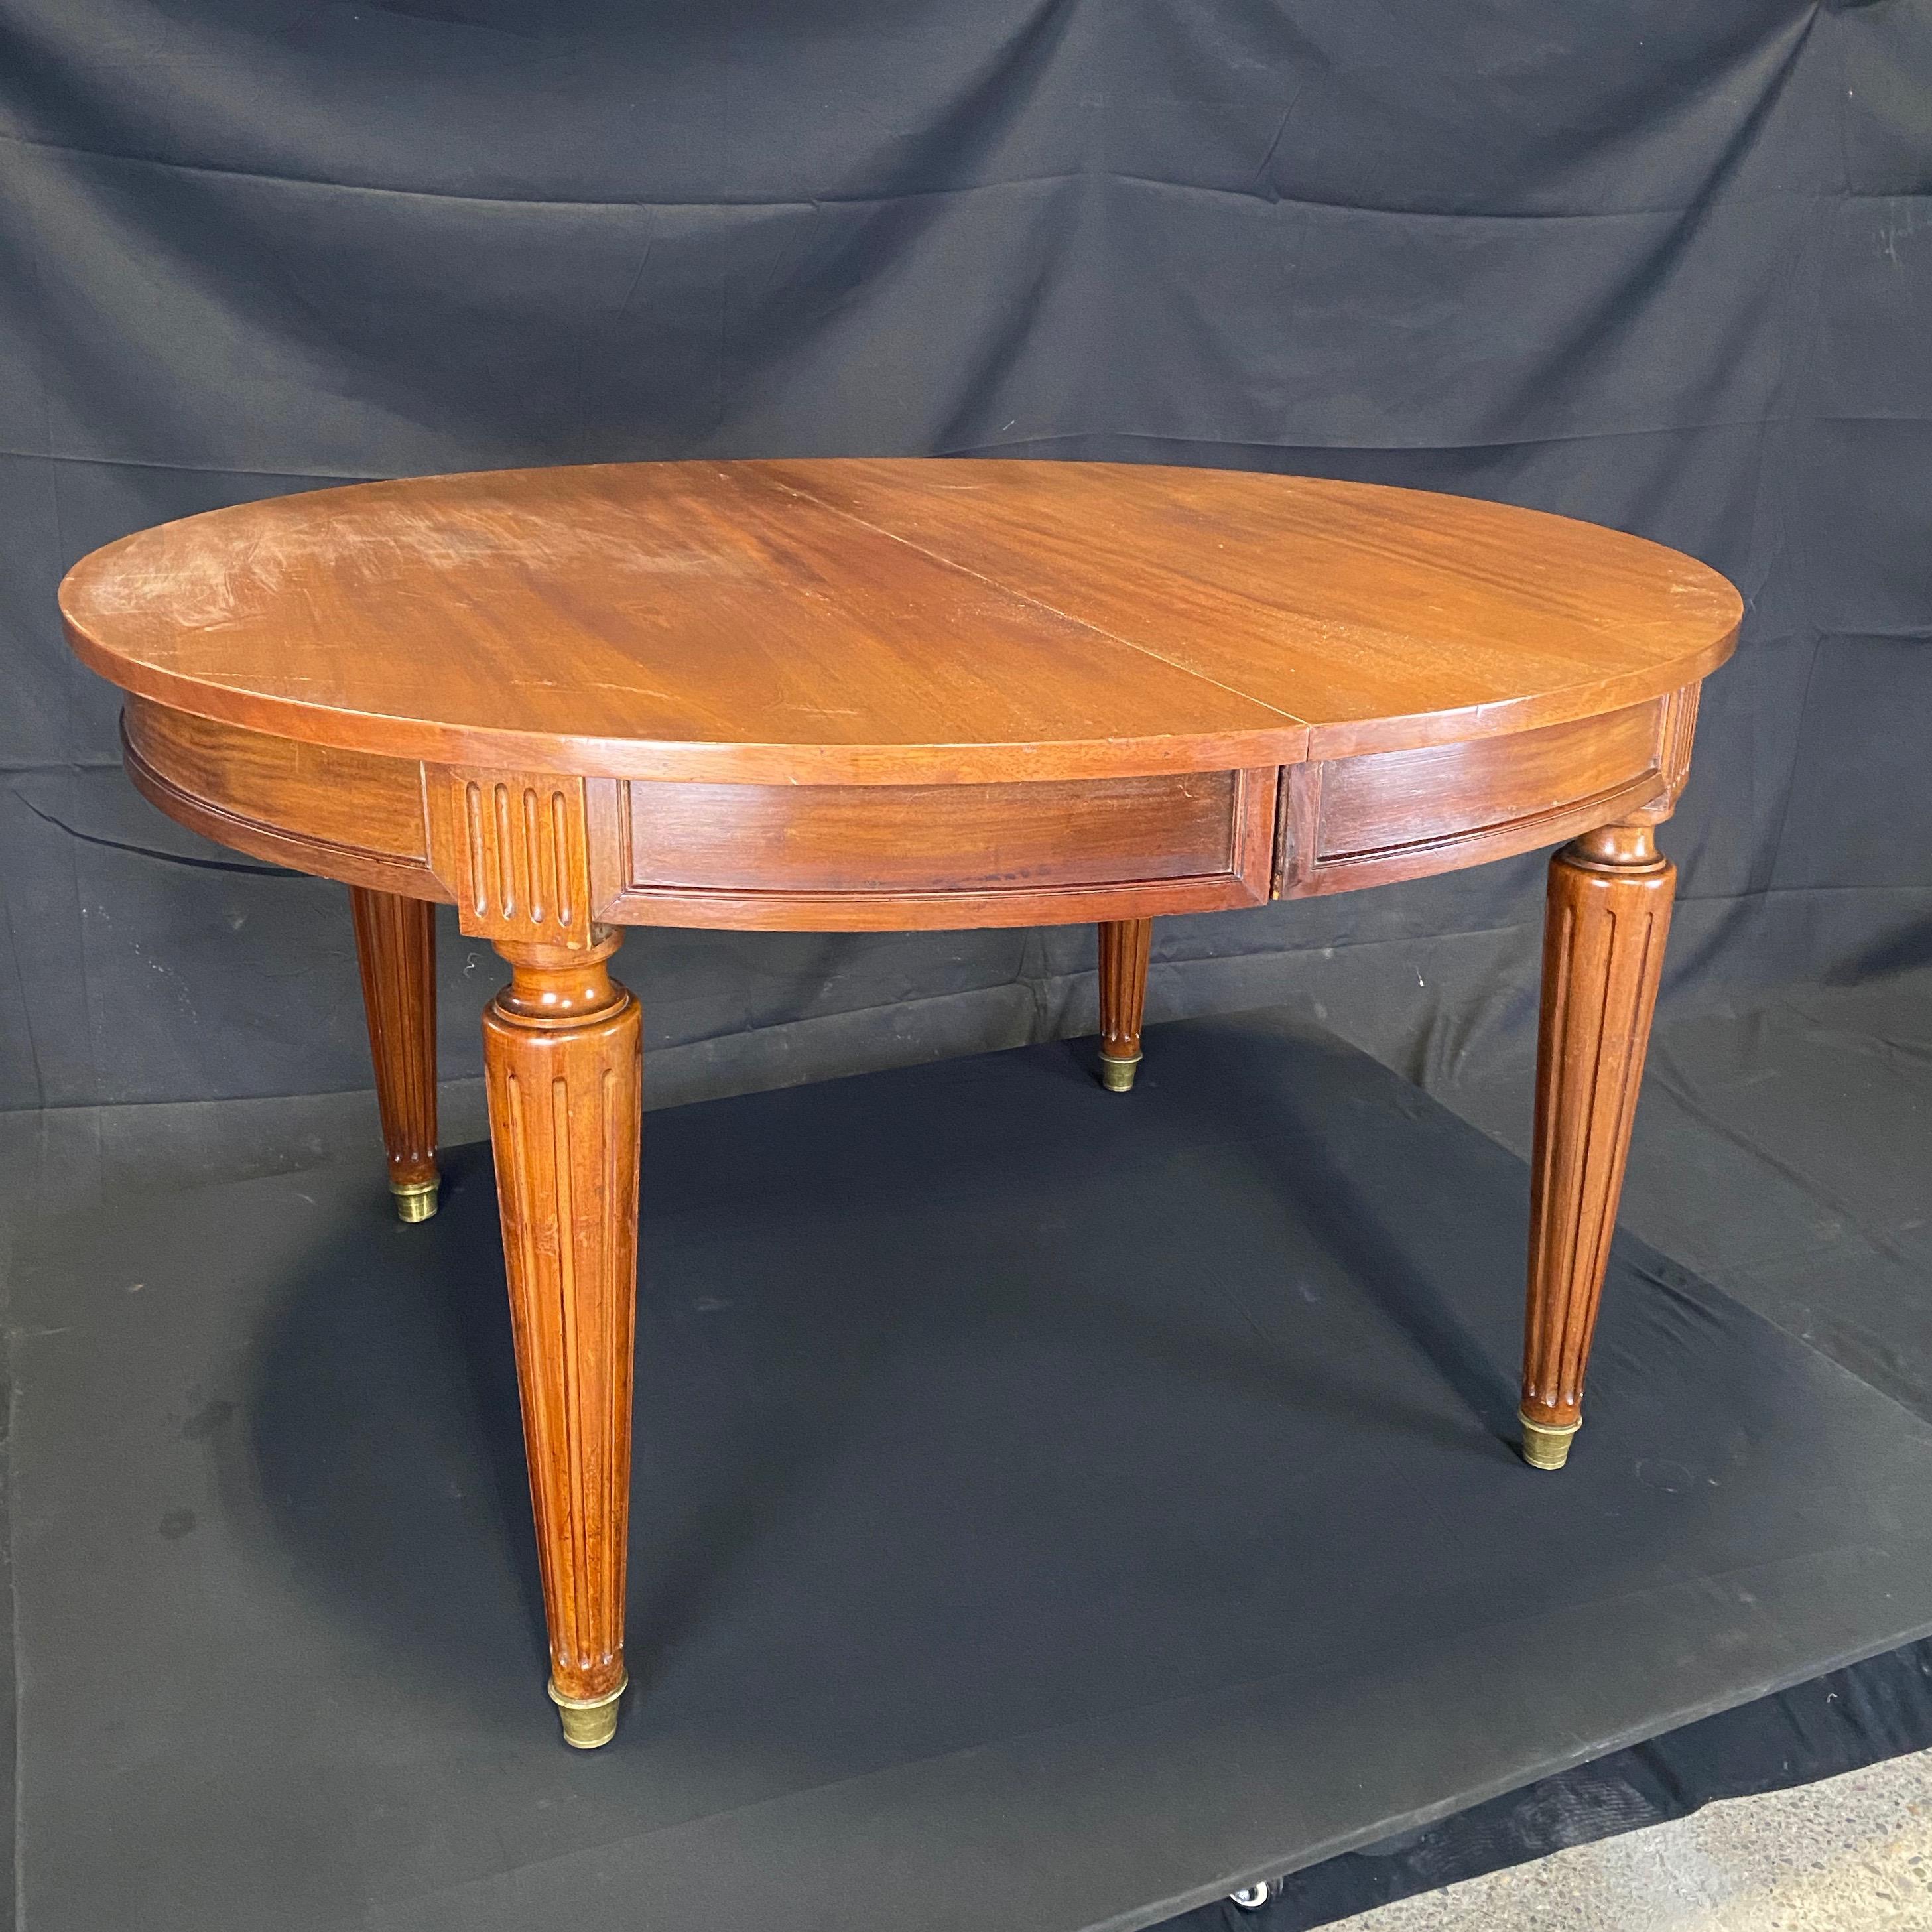 Lovely oval Louis XVI table from Lyon, France could serve many uses: as an entry or statement table, as a lovely floating desk, as a smaller dining table for 4, or expand to a 7'5